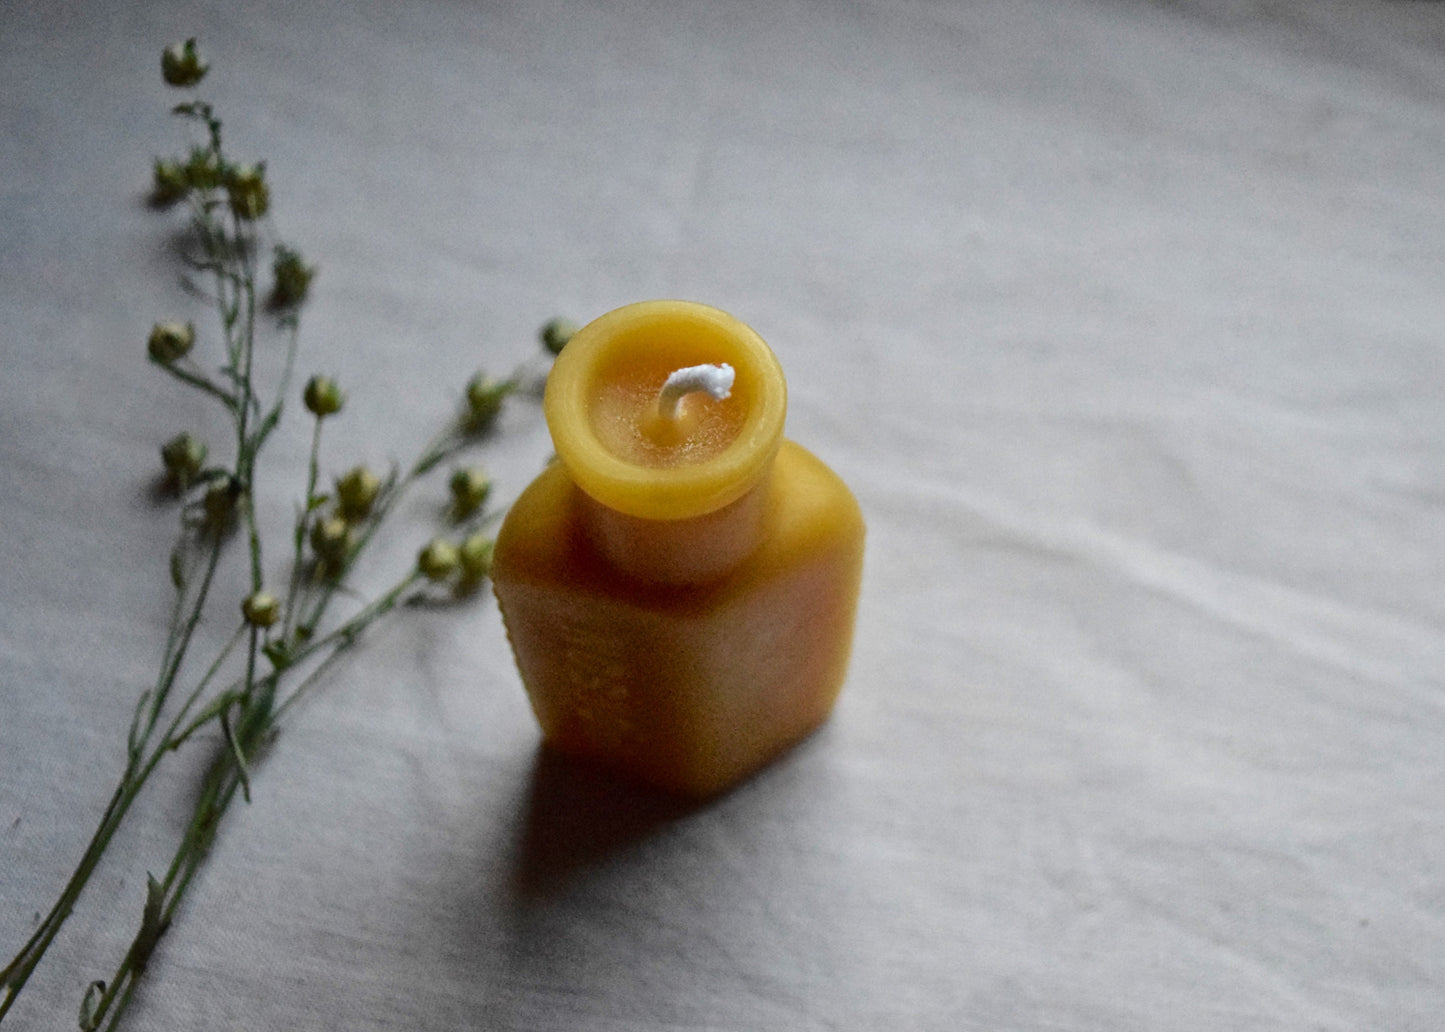 Poison Bottle Candle in Pure Beeswax - Antique 1800s Apothecary Bottle Candle, Burnable Bottle, Beeswax, Beeswax Candle, Vintage